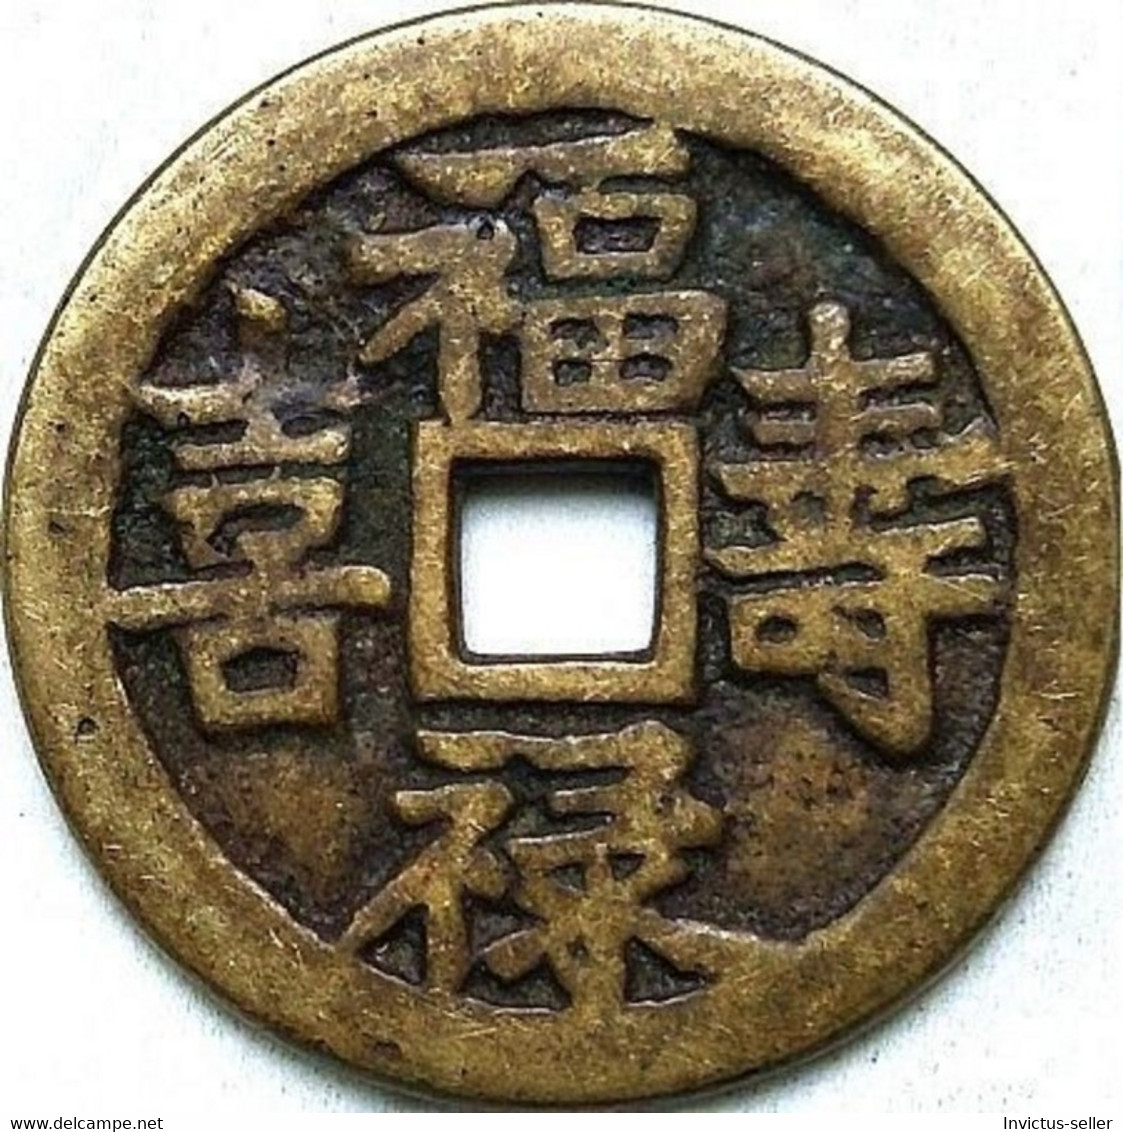 ANTICA MONETA CINESE PERIODO IMPERIALE CHINESE COINS CHINE PIÈCE CHINOISE CHINESISCHE MÜNZE COD H04 - China